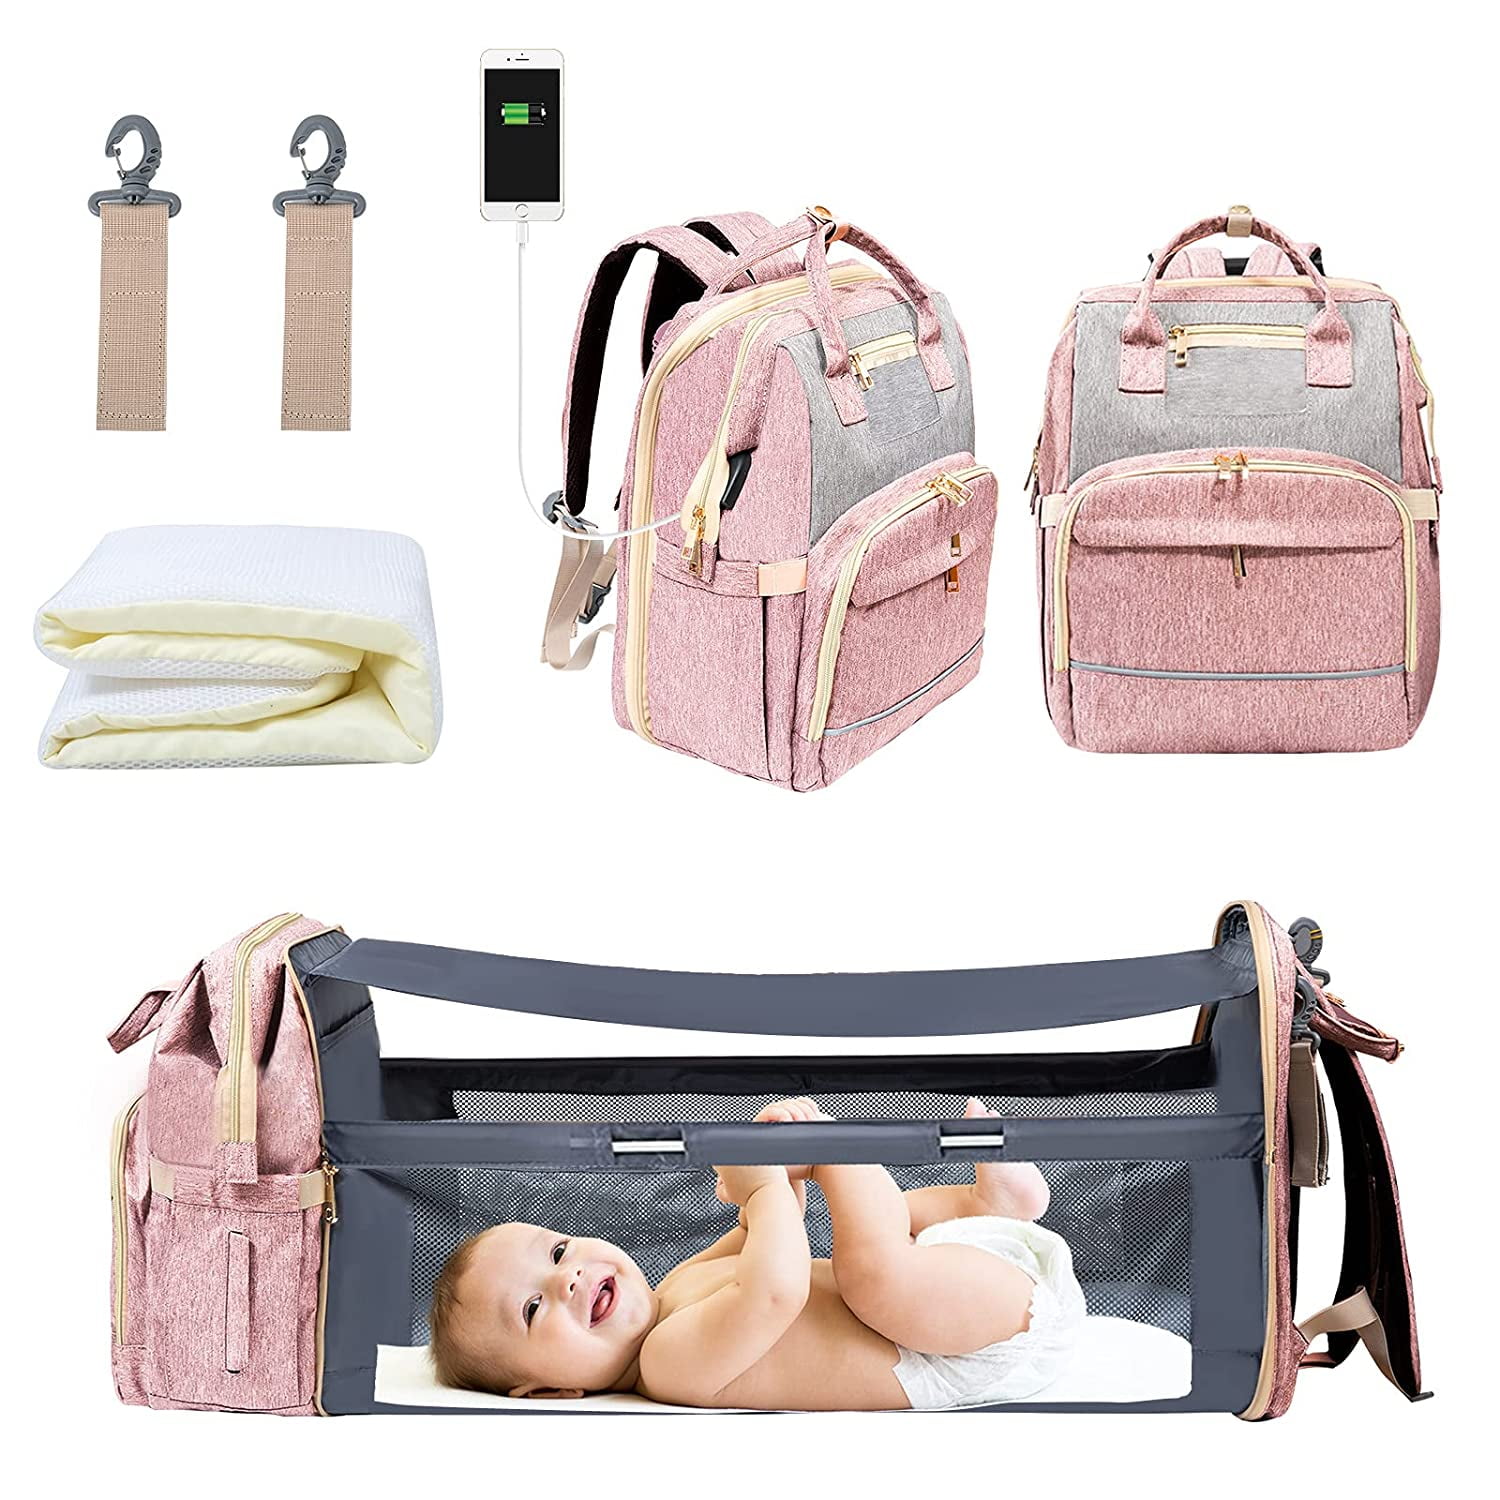 Diaper Bag Backpack with Changing Station, VICVEO Large Baby Diaper Bags  for Boys Girls, Waterproof Travel Back Pack with Bassinet, Portable  Changing